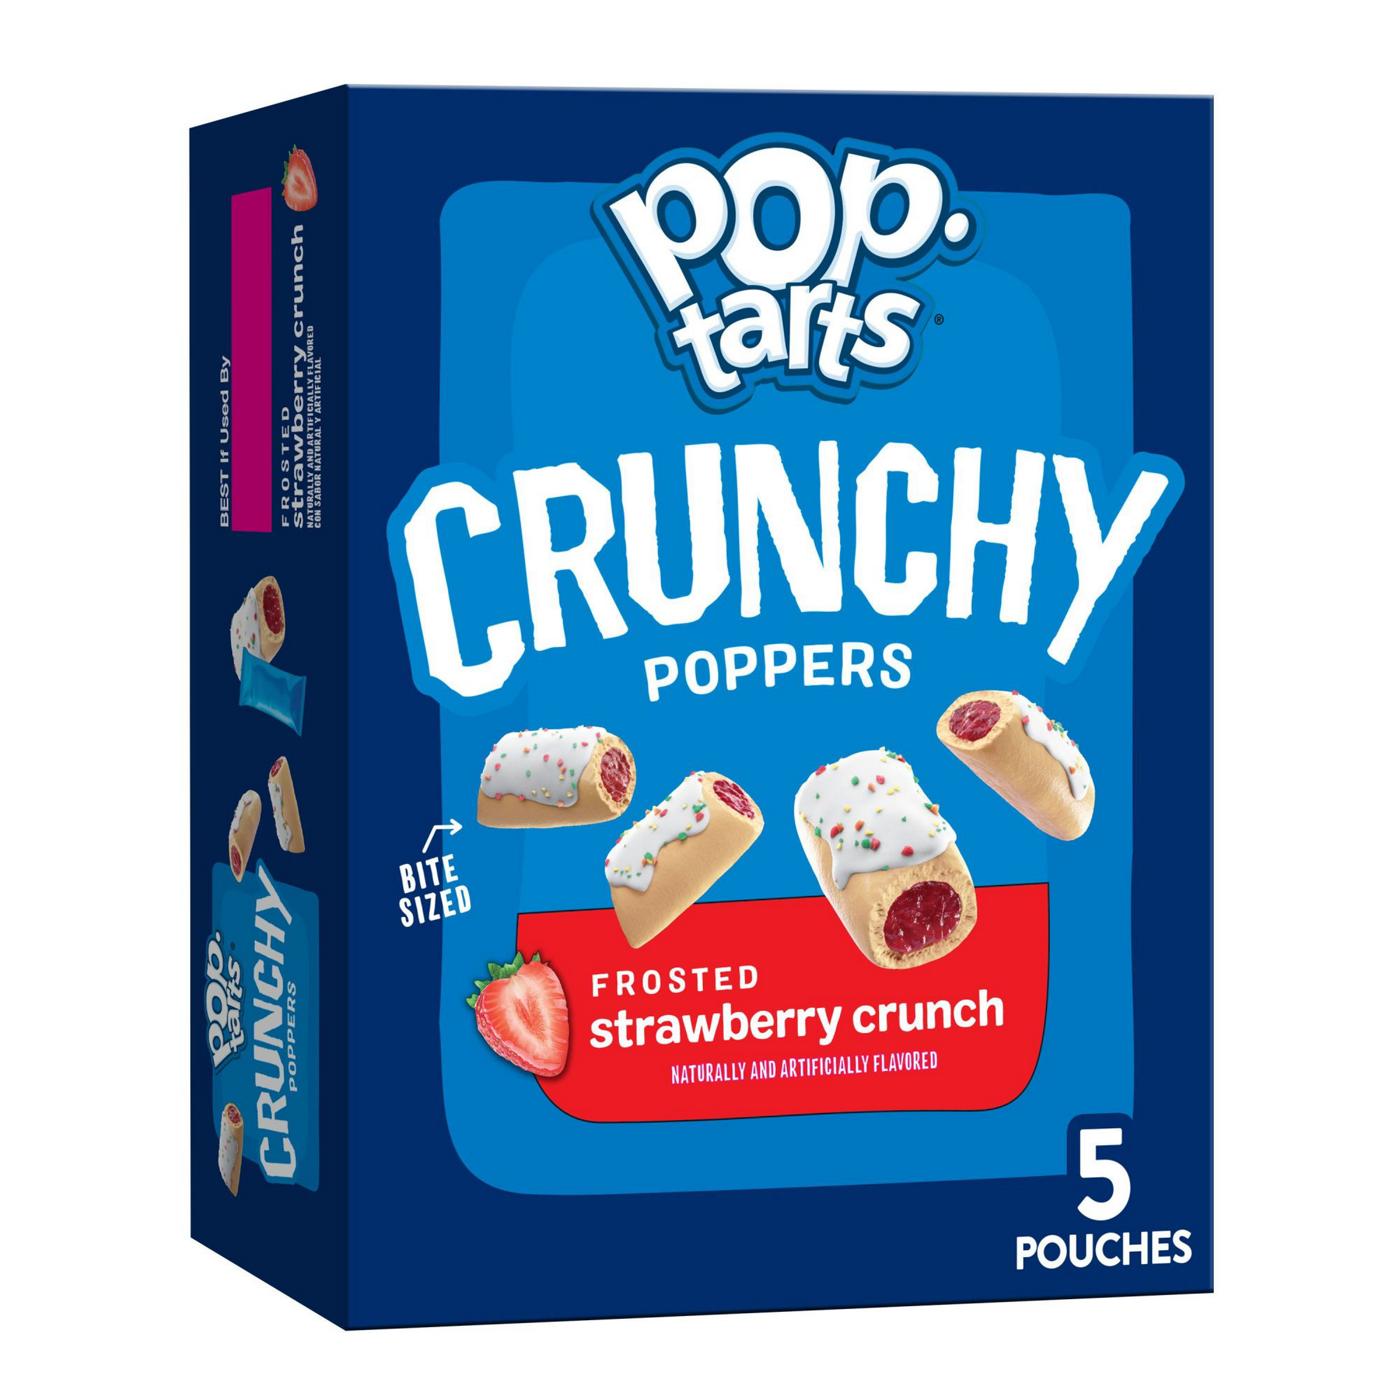 Pop-Tarts Crunchy Poppers Frosted Strawberry Crunch Crunchy Filled Snack Pieces; image 5 of 6